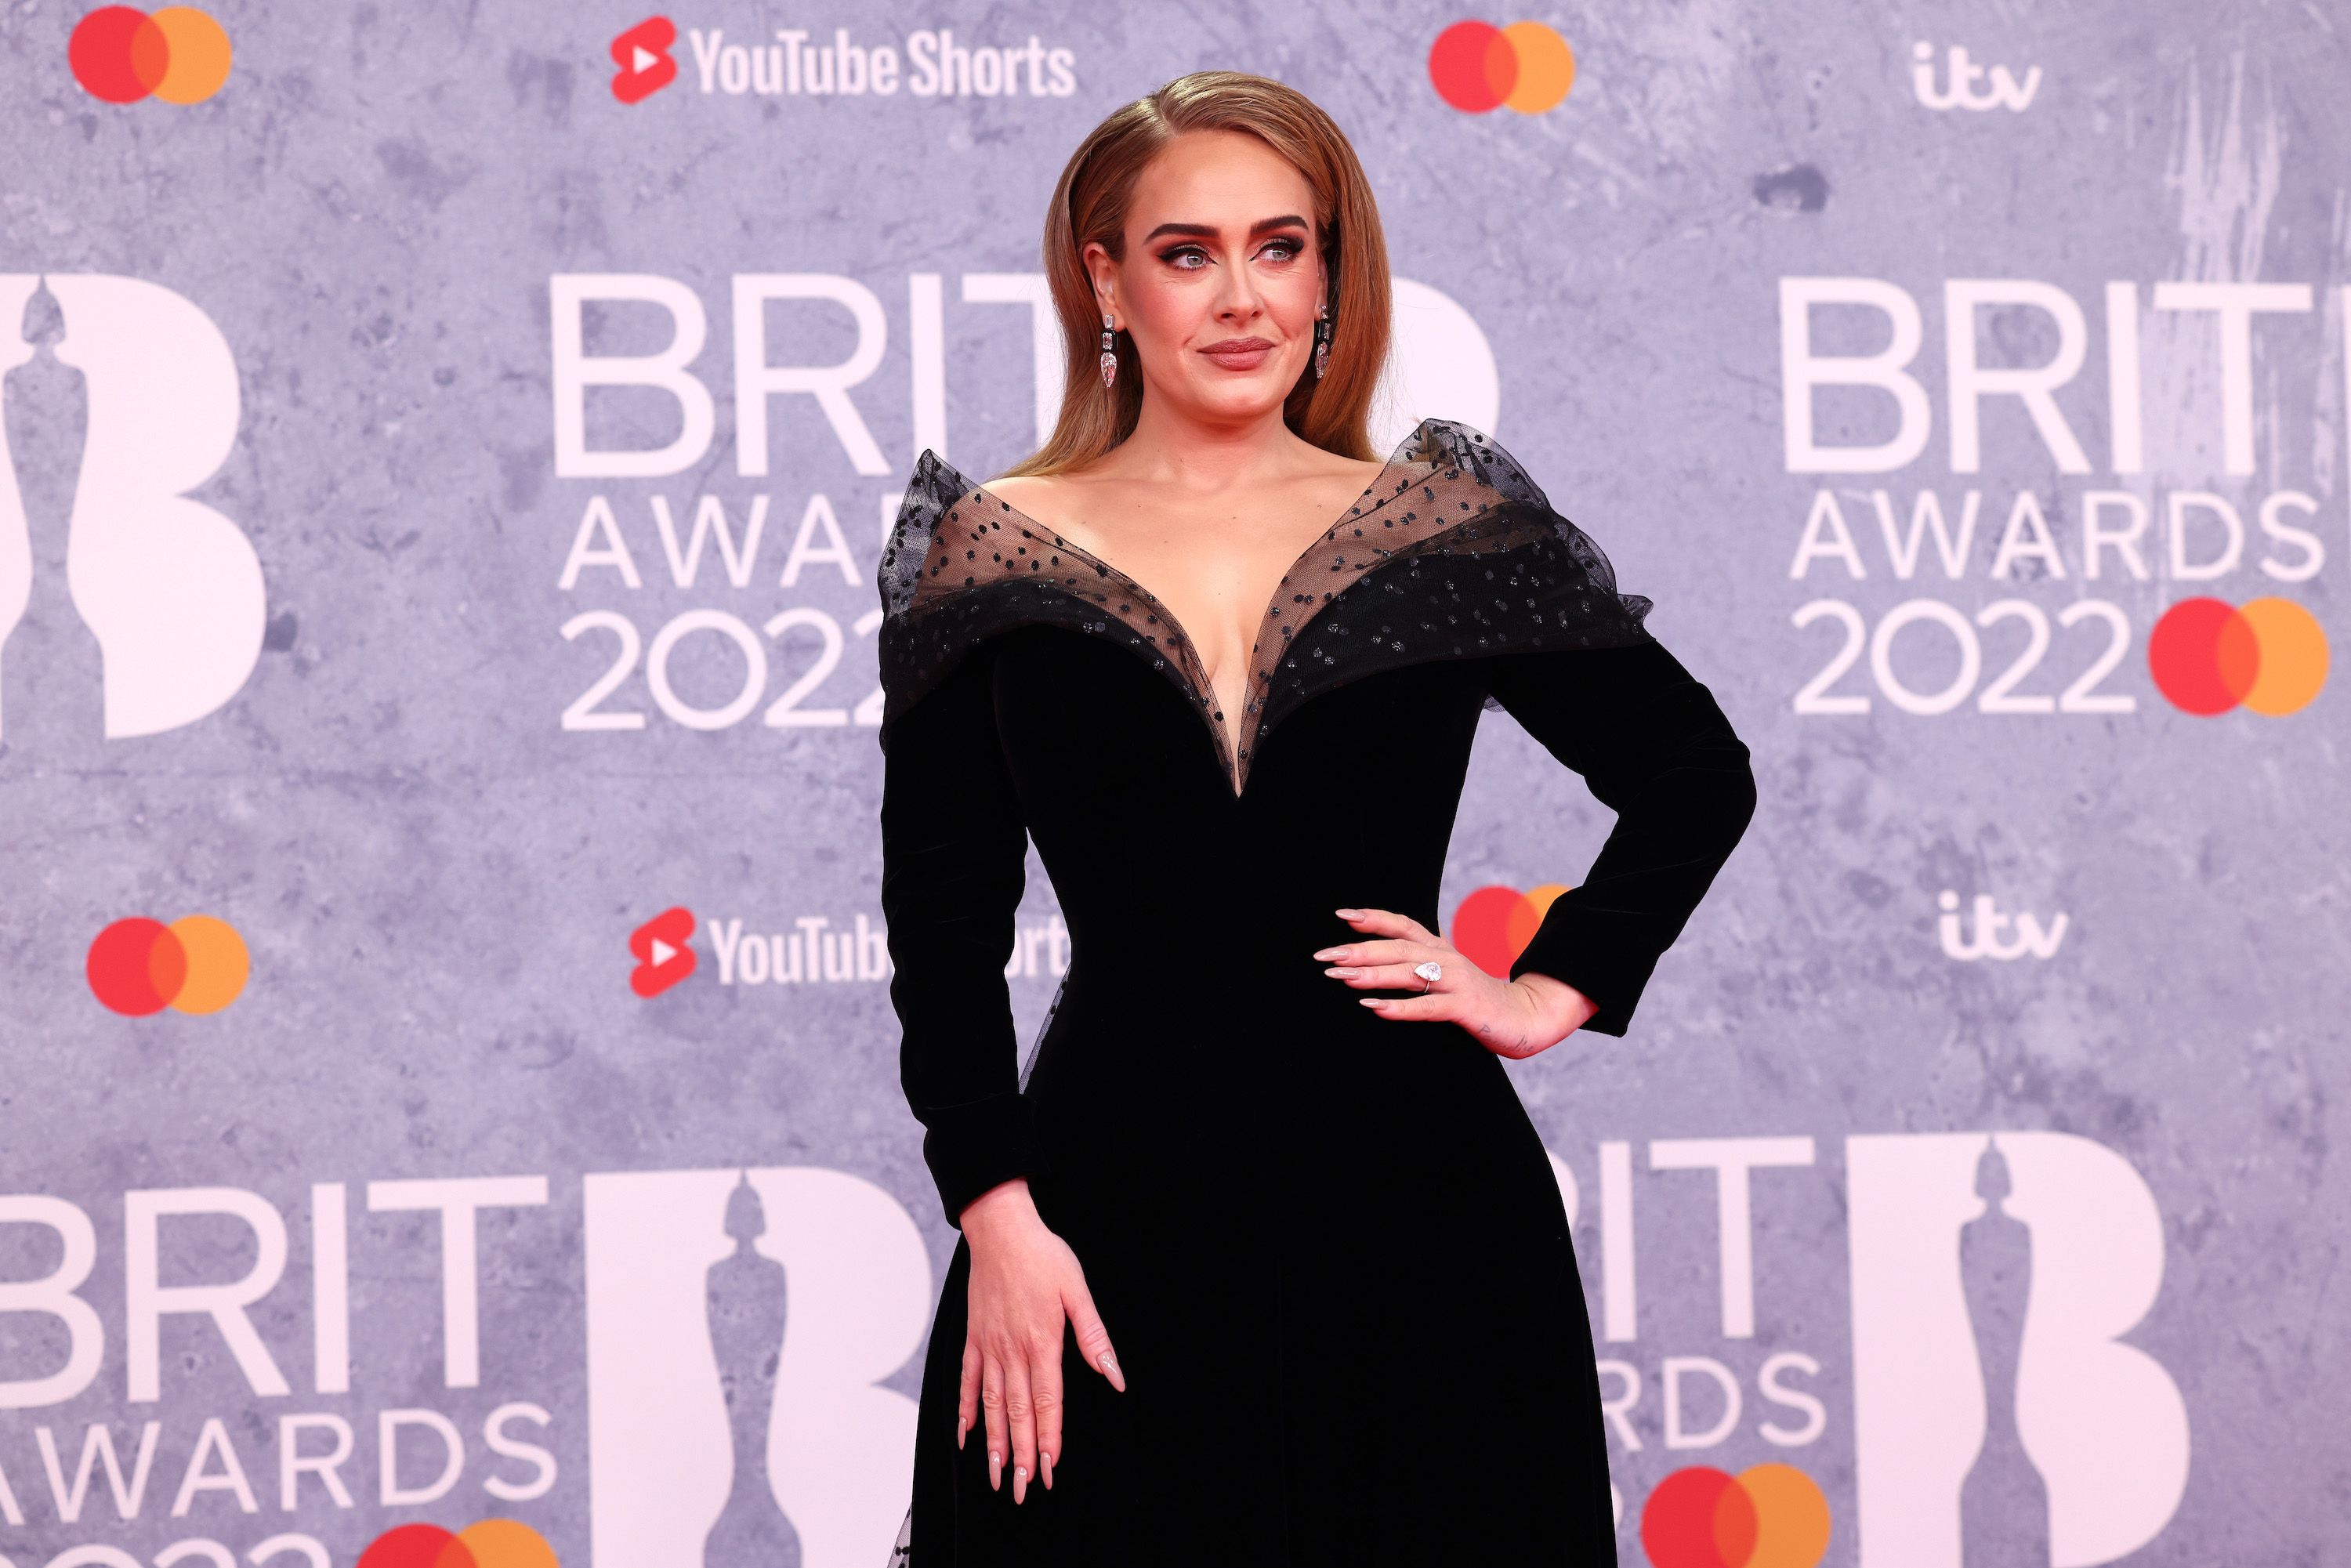 Adele Wore a Dramatic Black Velvet Gown to the BRIT Awards